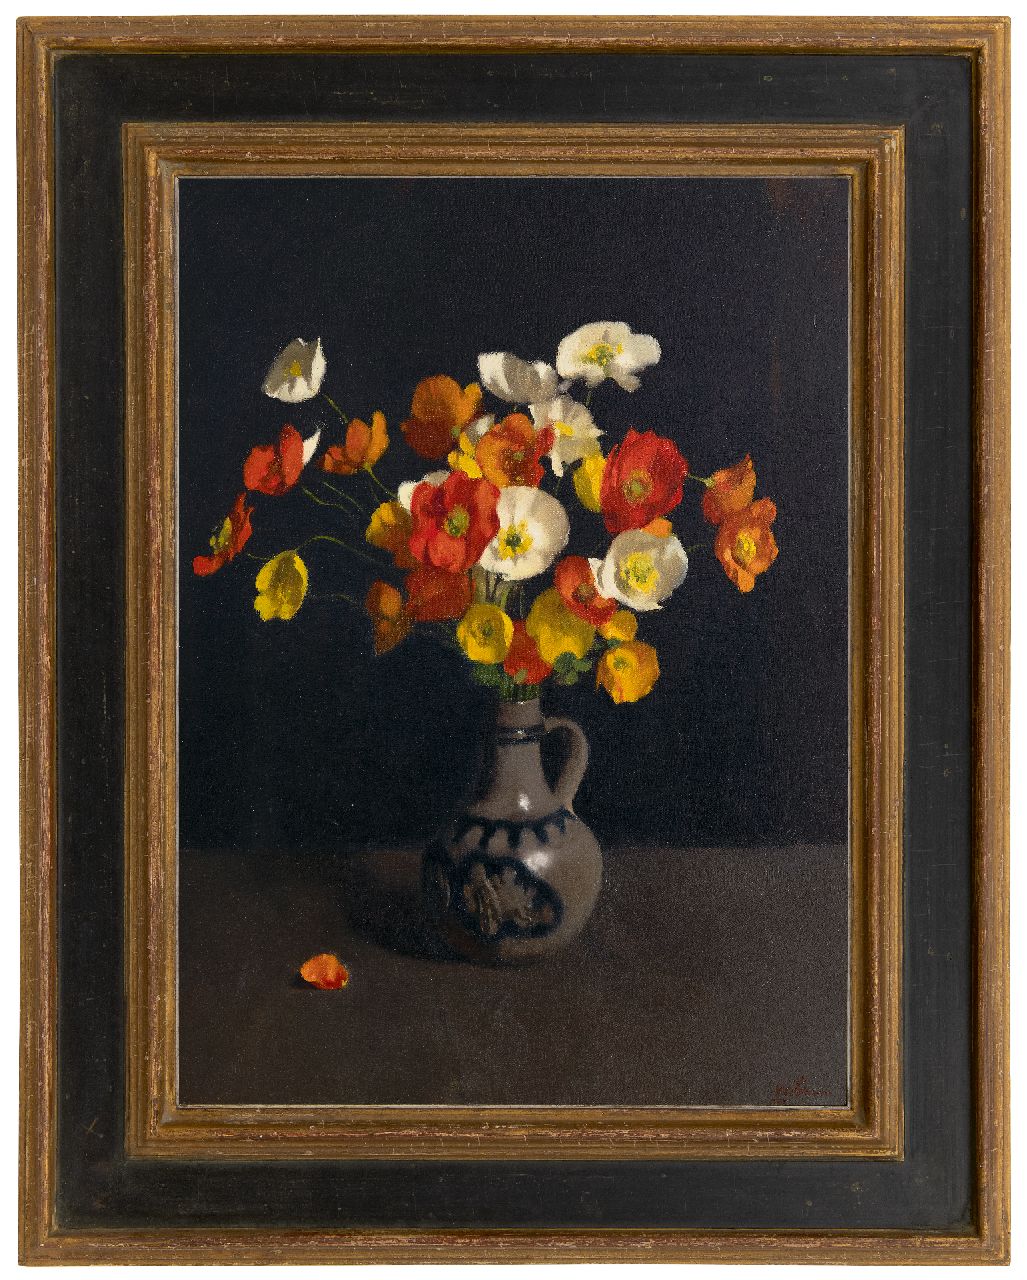 Witsen W.A.  | 'Willem' Arnold Witsen, Poppies in a stone pitcher, oil on canvas 62.4 x 45.8 cm, signed l.r.